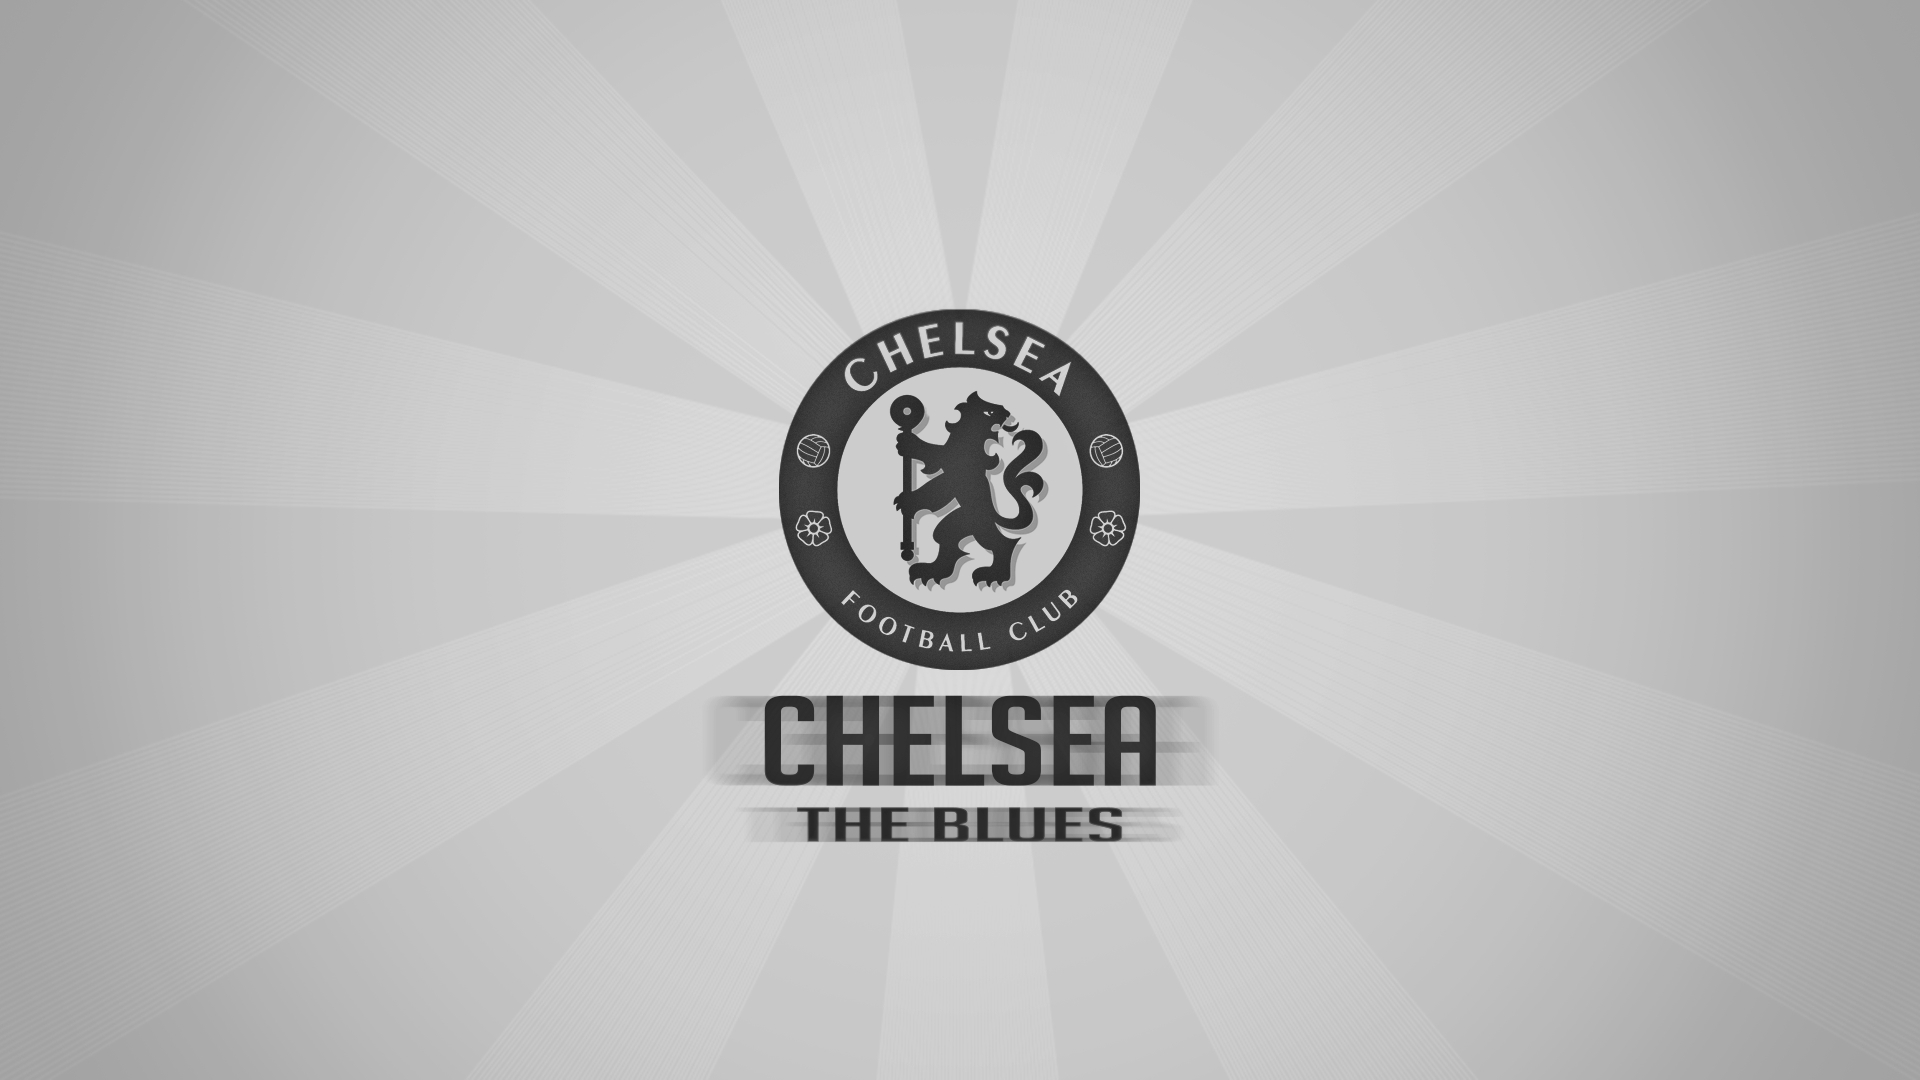 Chelsea F C Hd Wallpaper Background Image 1920x1080 Id 1024977 Wallpaper Abyss